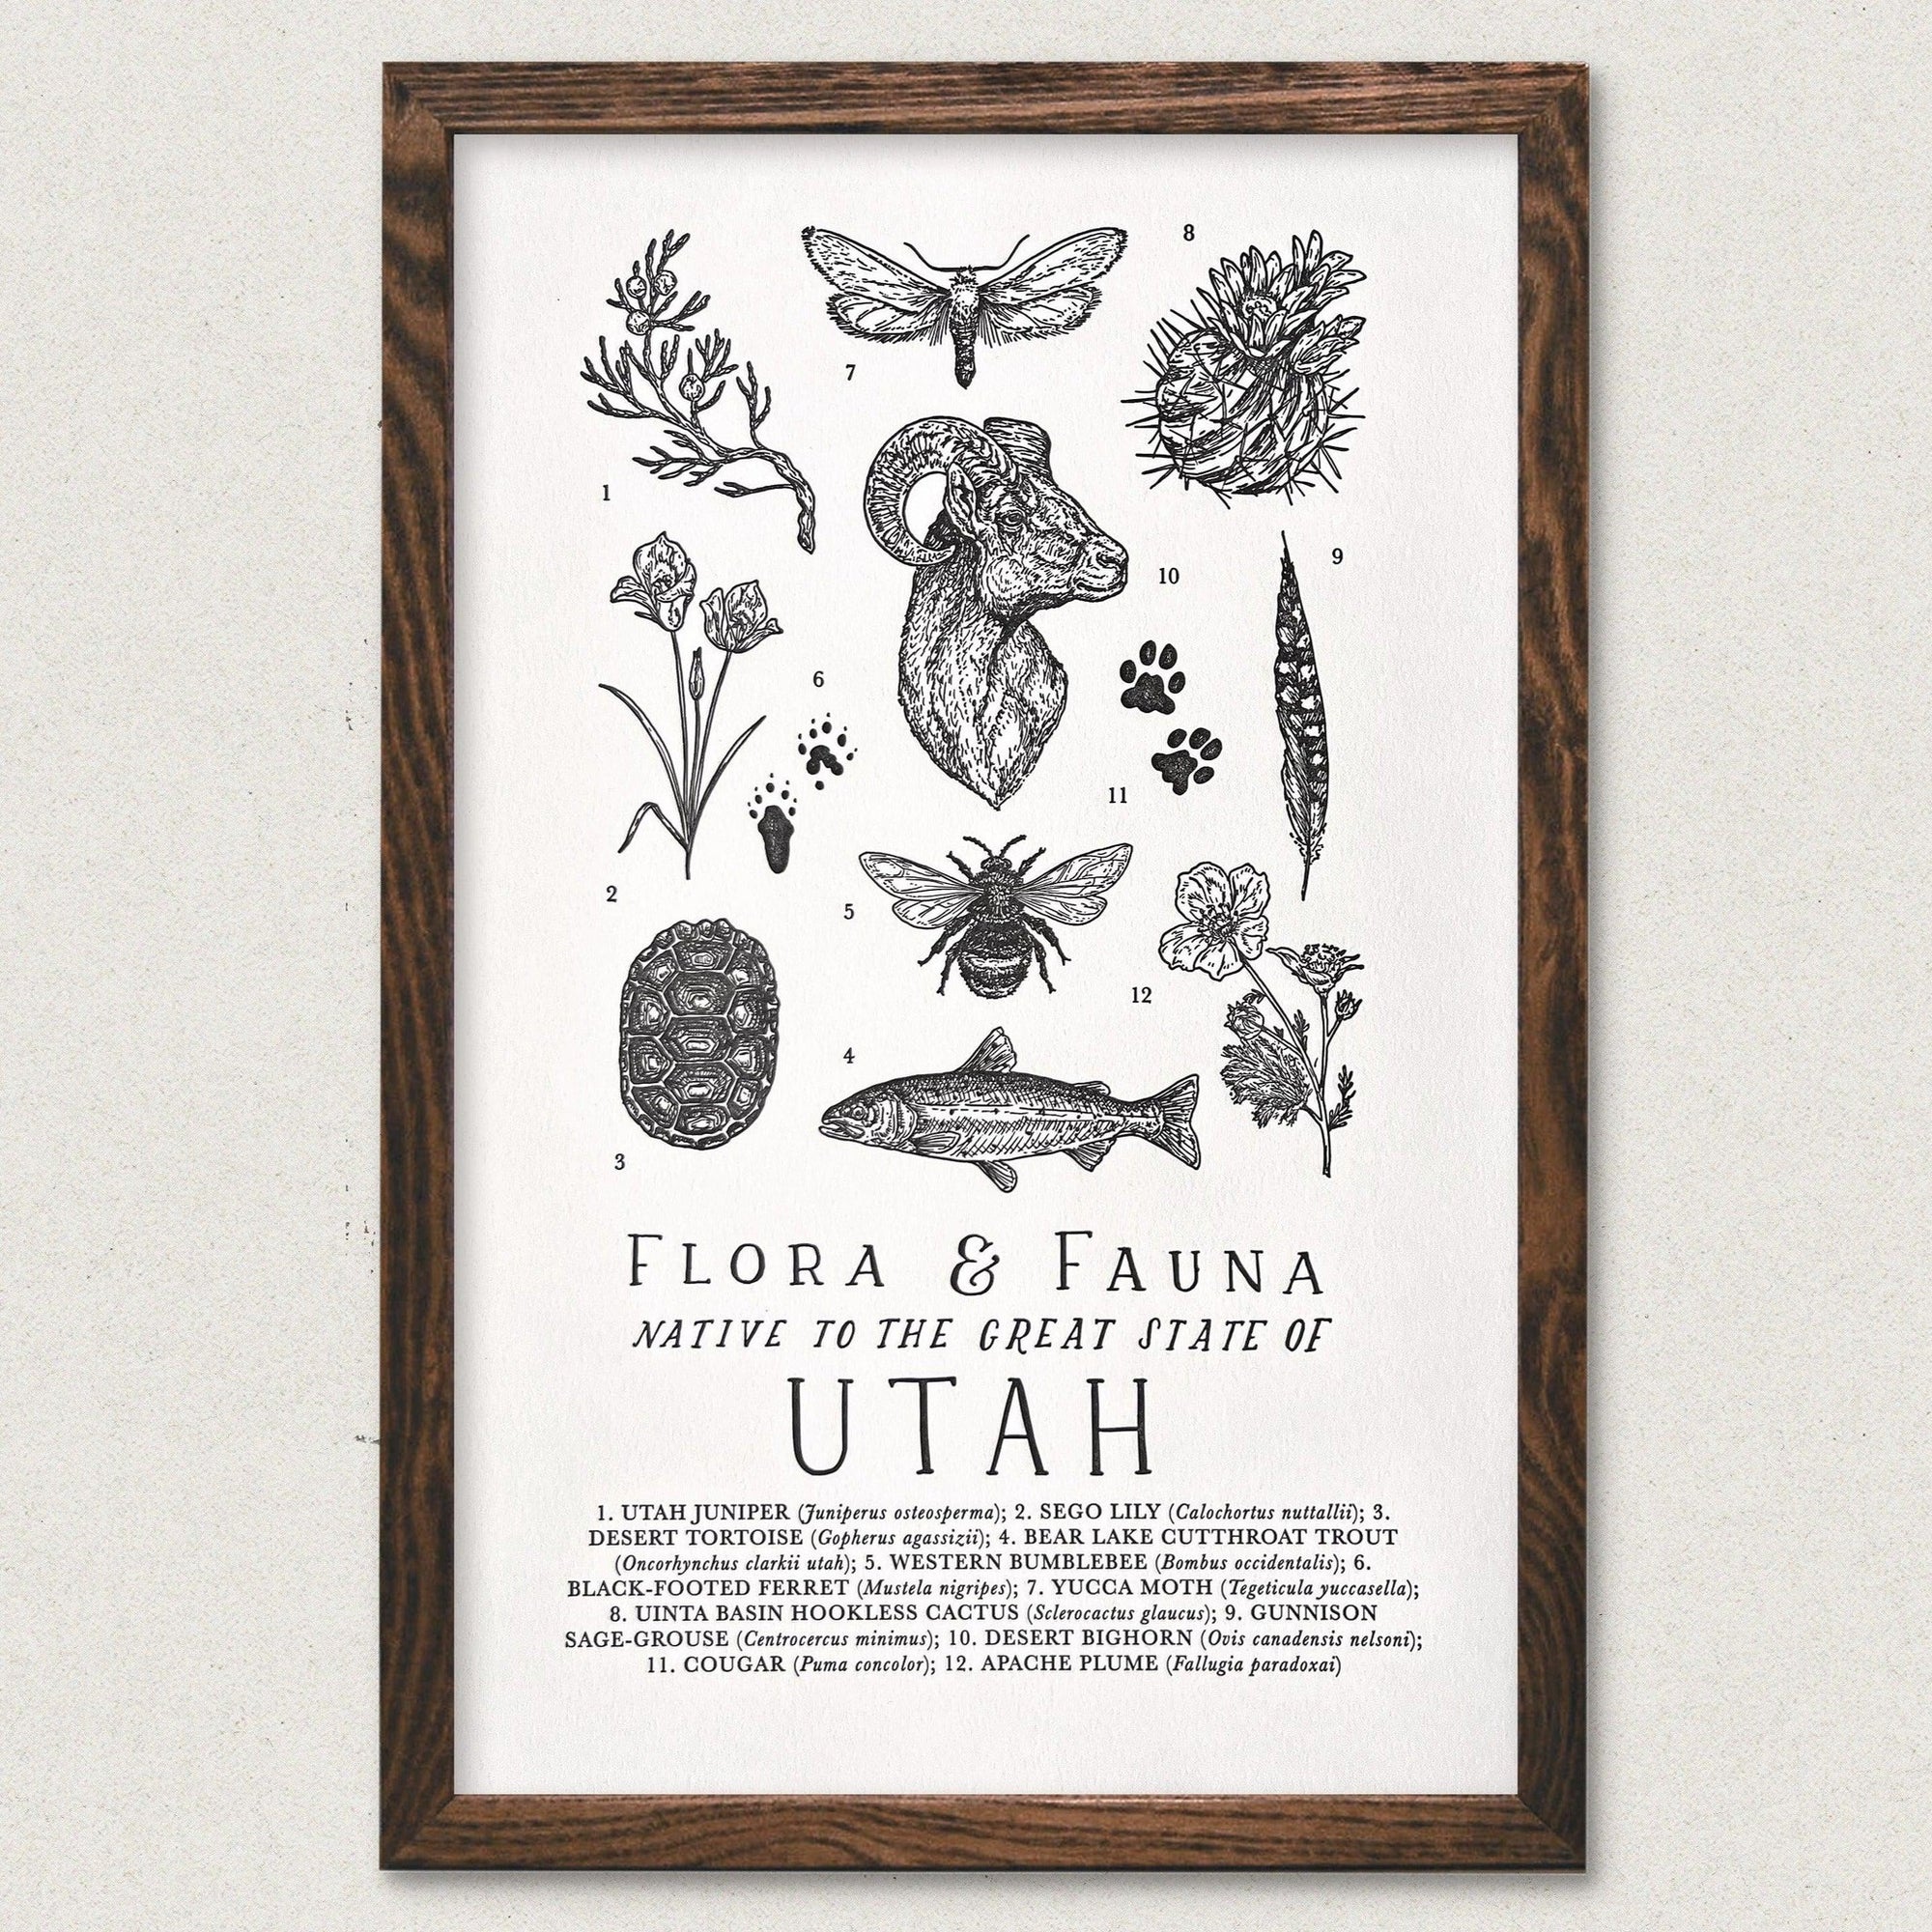 The Utah Field Guide Letterpress Print by The Wild Wander, featuring various plants and flowers.